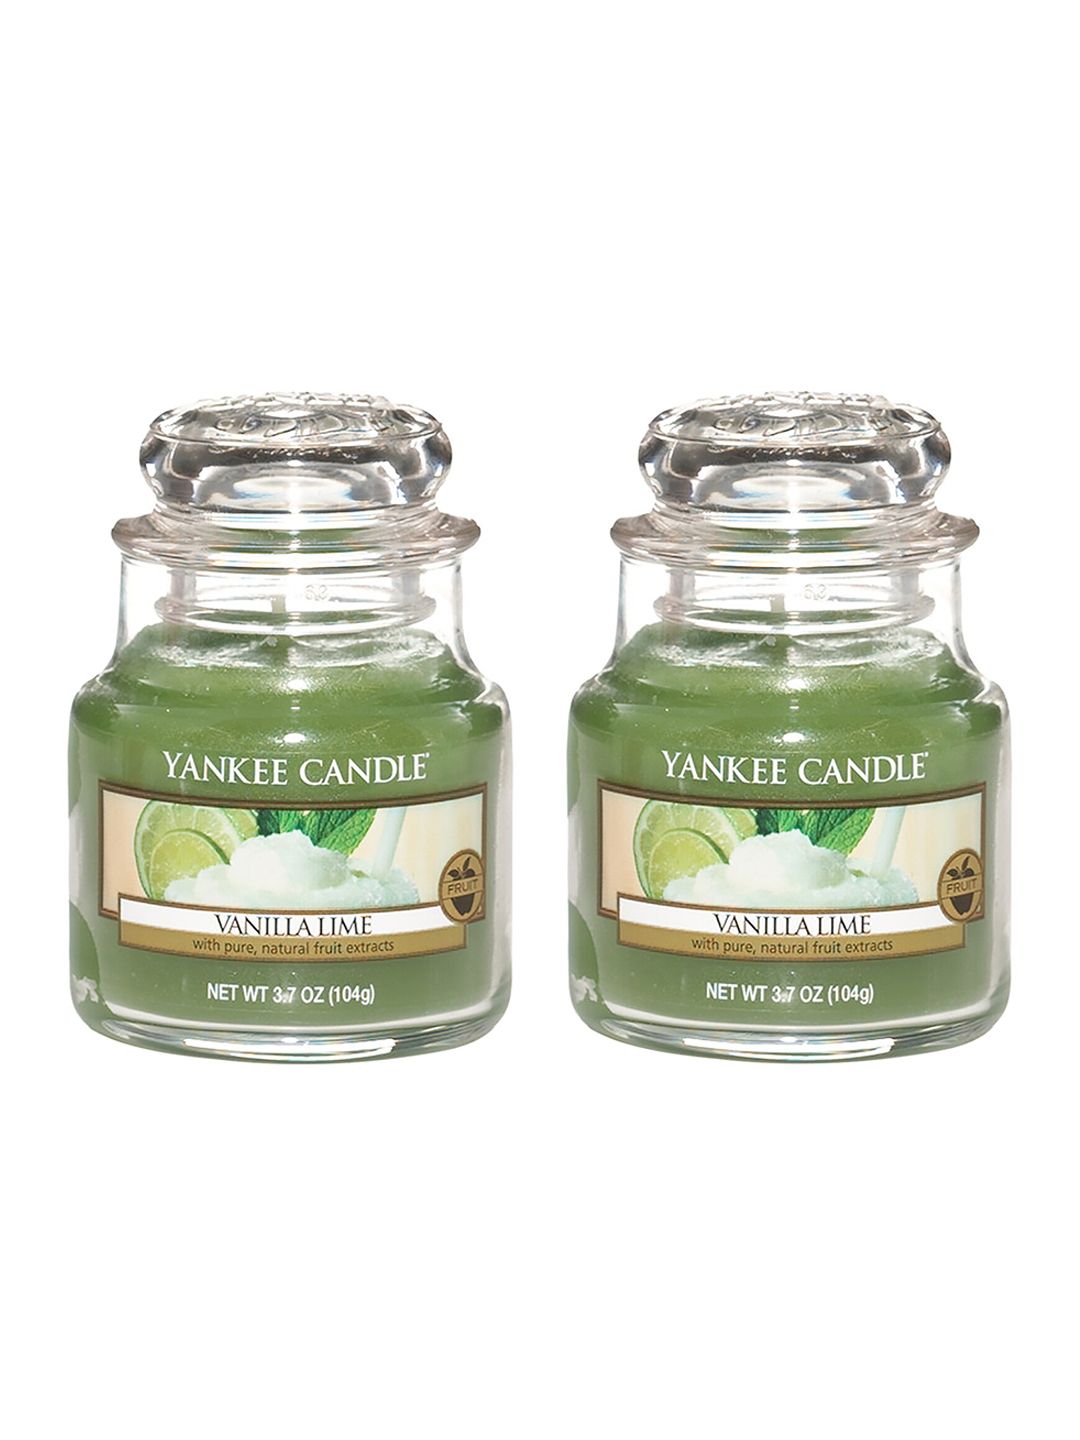 YANKEE CANDLE Set Of 2 Classic Jar Vanilla Lime Scented Candles Price in India